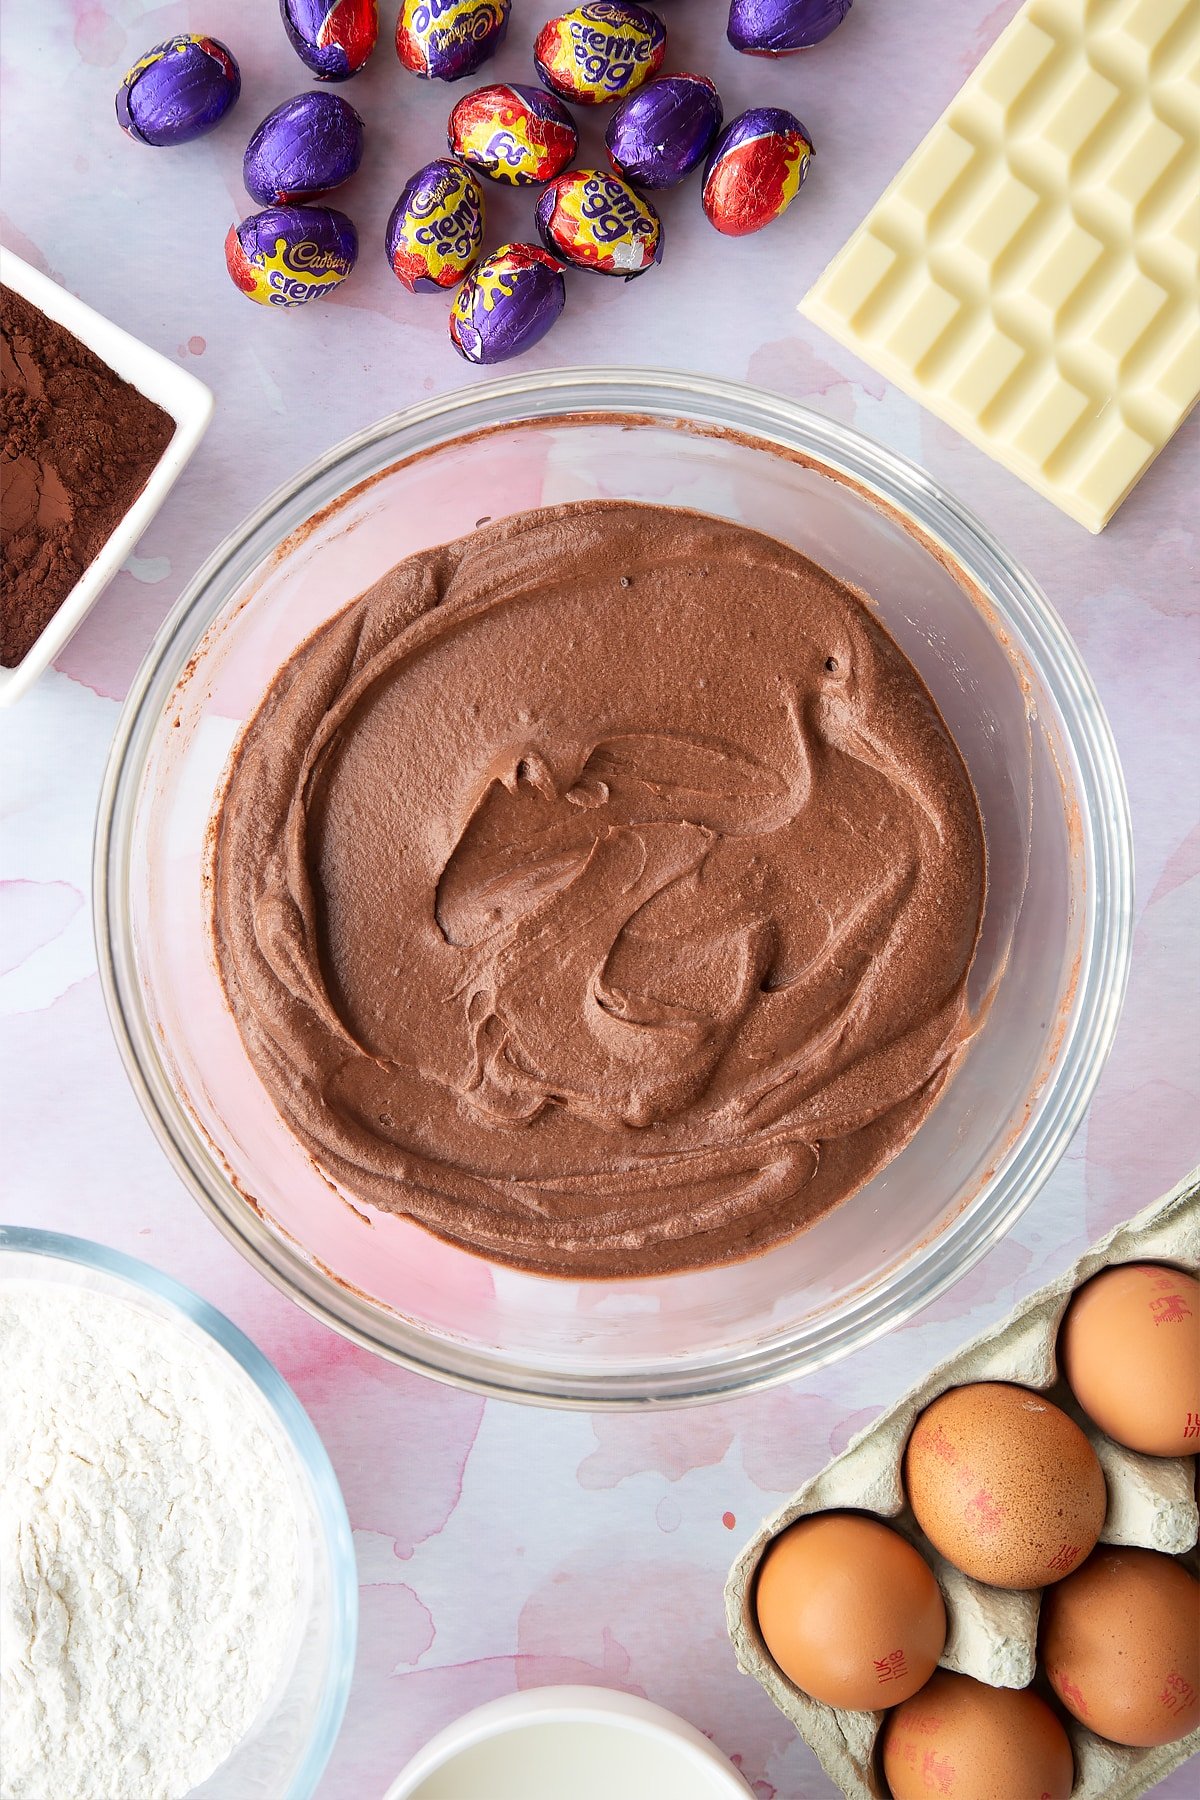 Chocolate cake batter in a bowl. Ingredients to make Cadbury Creme Egg cakes surround the bowl.